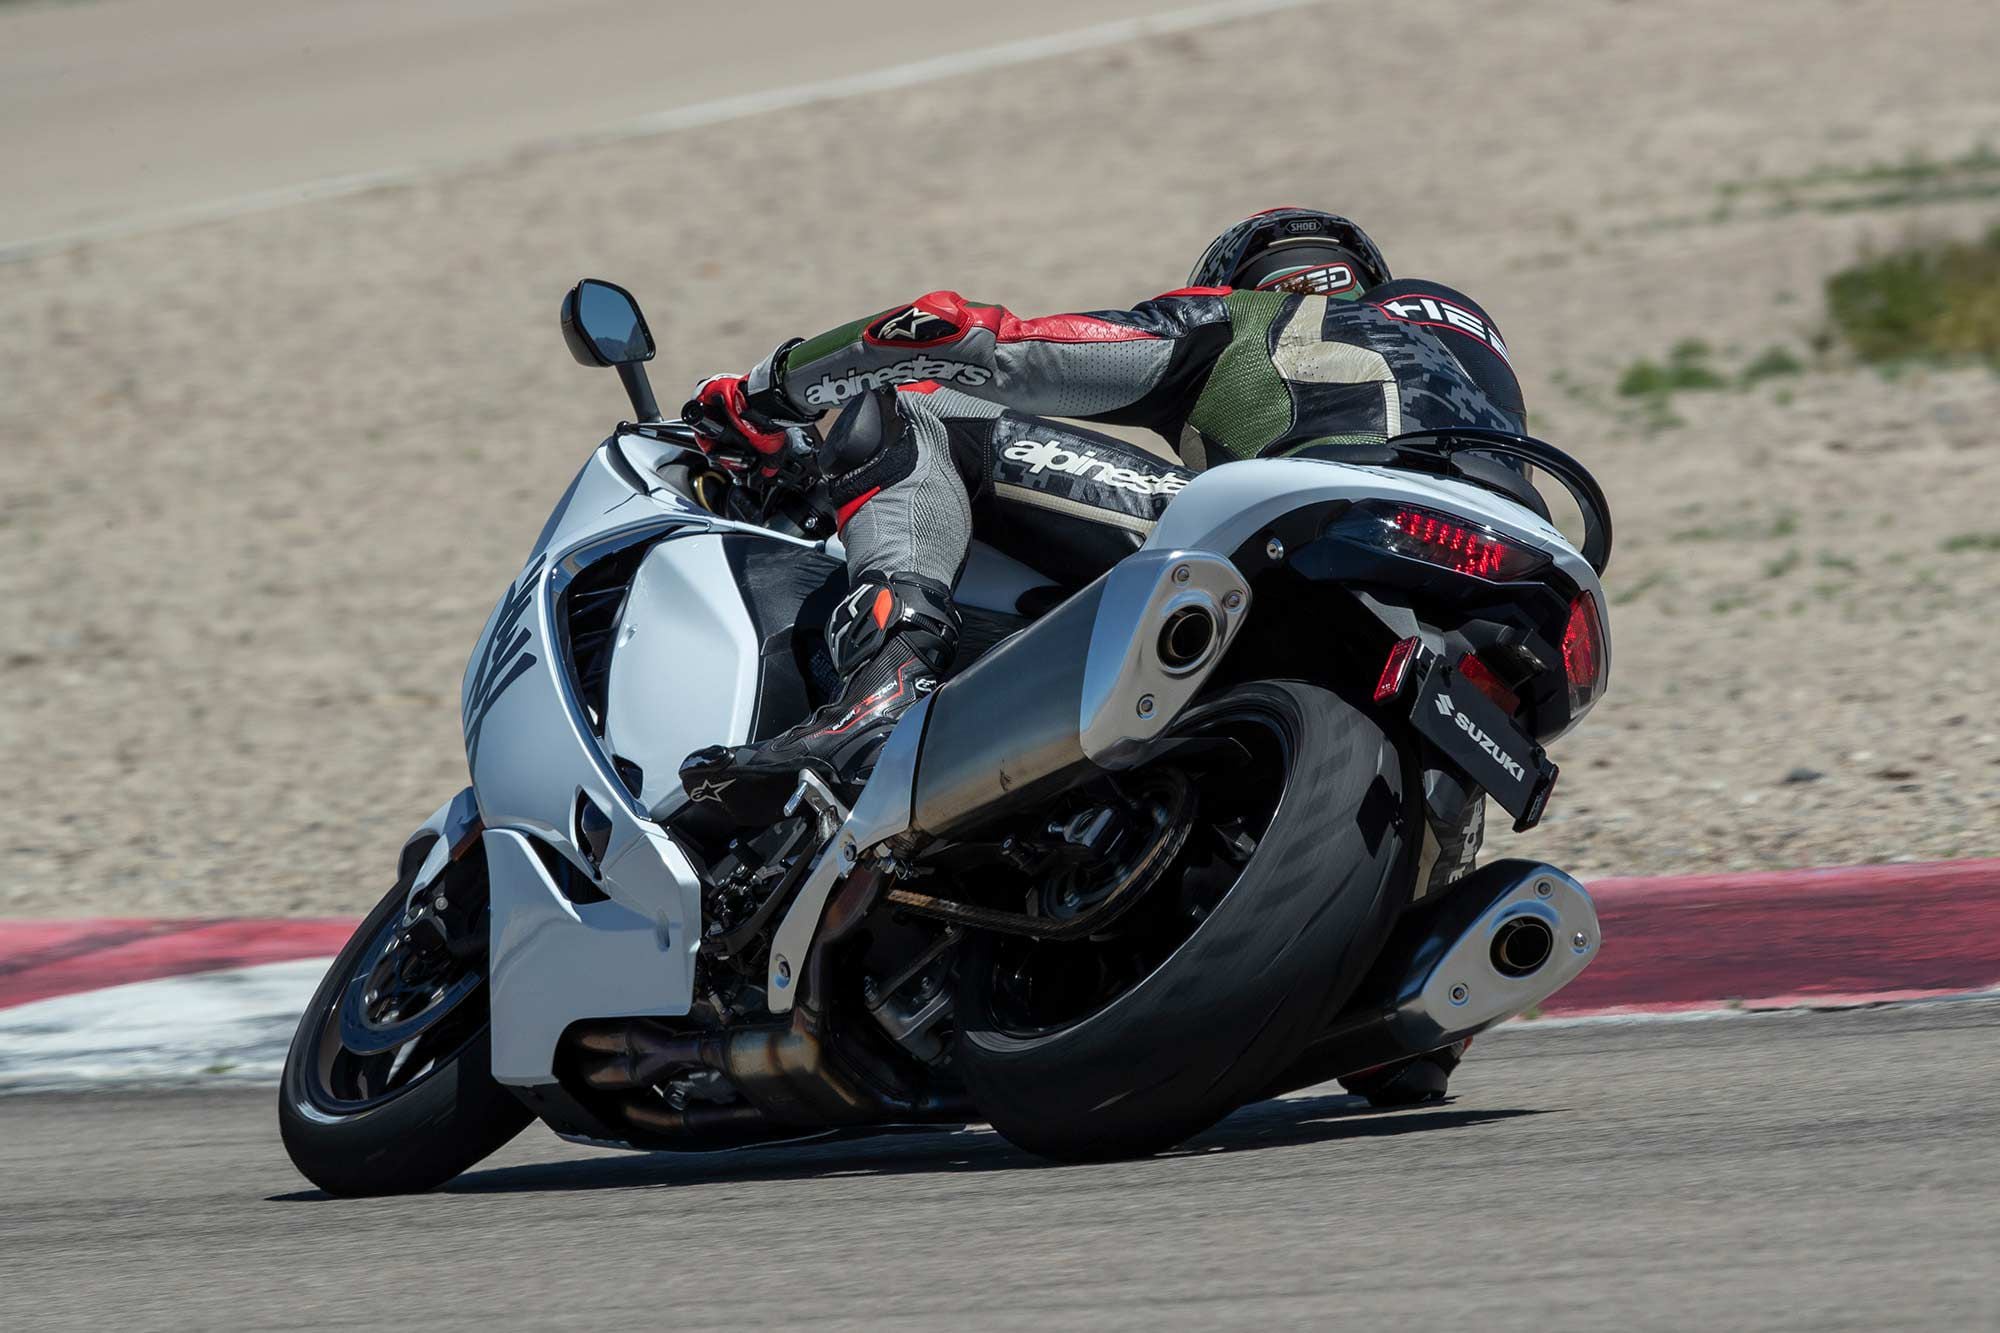 The Bridgestone Battlax S22 tires are a huge improvement. As opposed to the commercial version, these tires make use of a uniform compound to better withstand the extra weight (and speed) of the ’Busa.